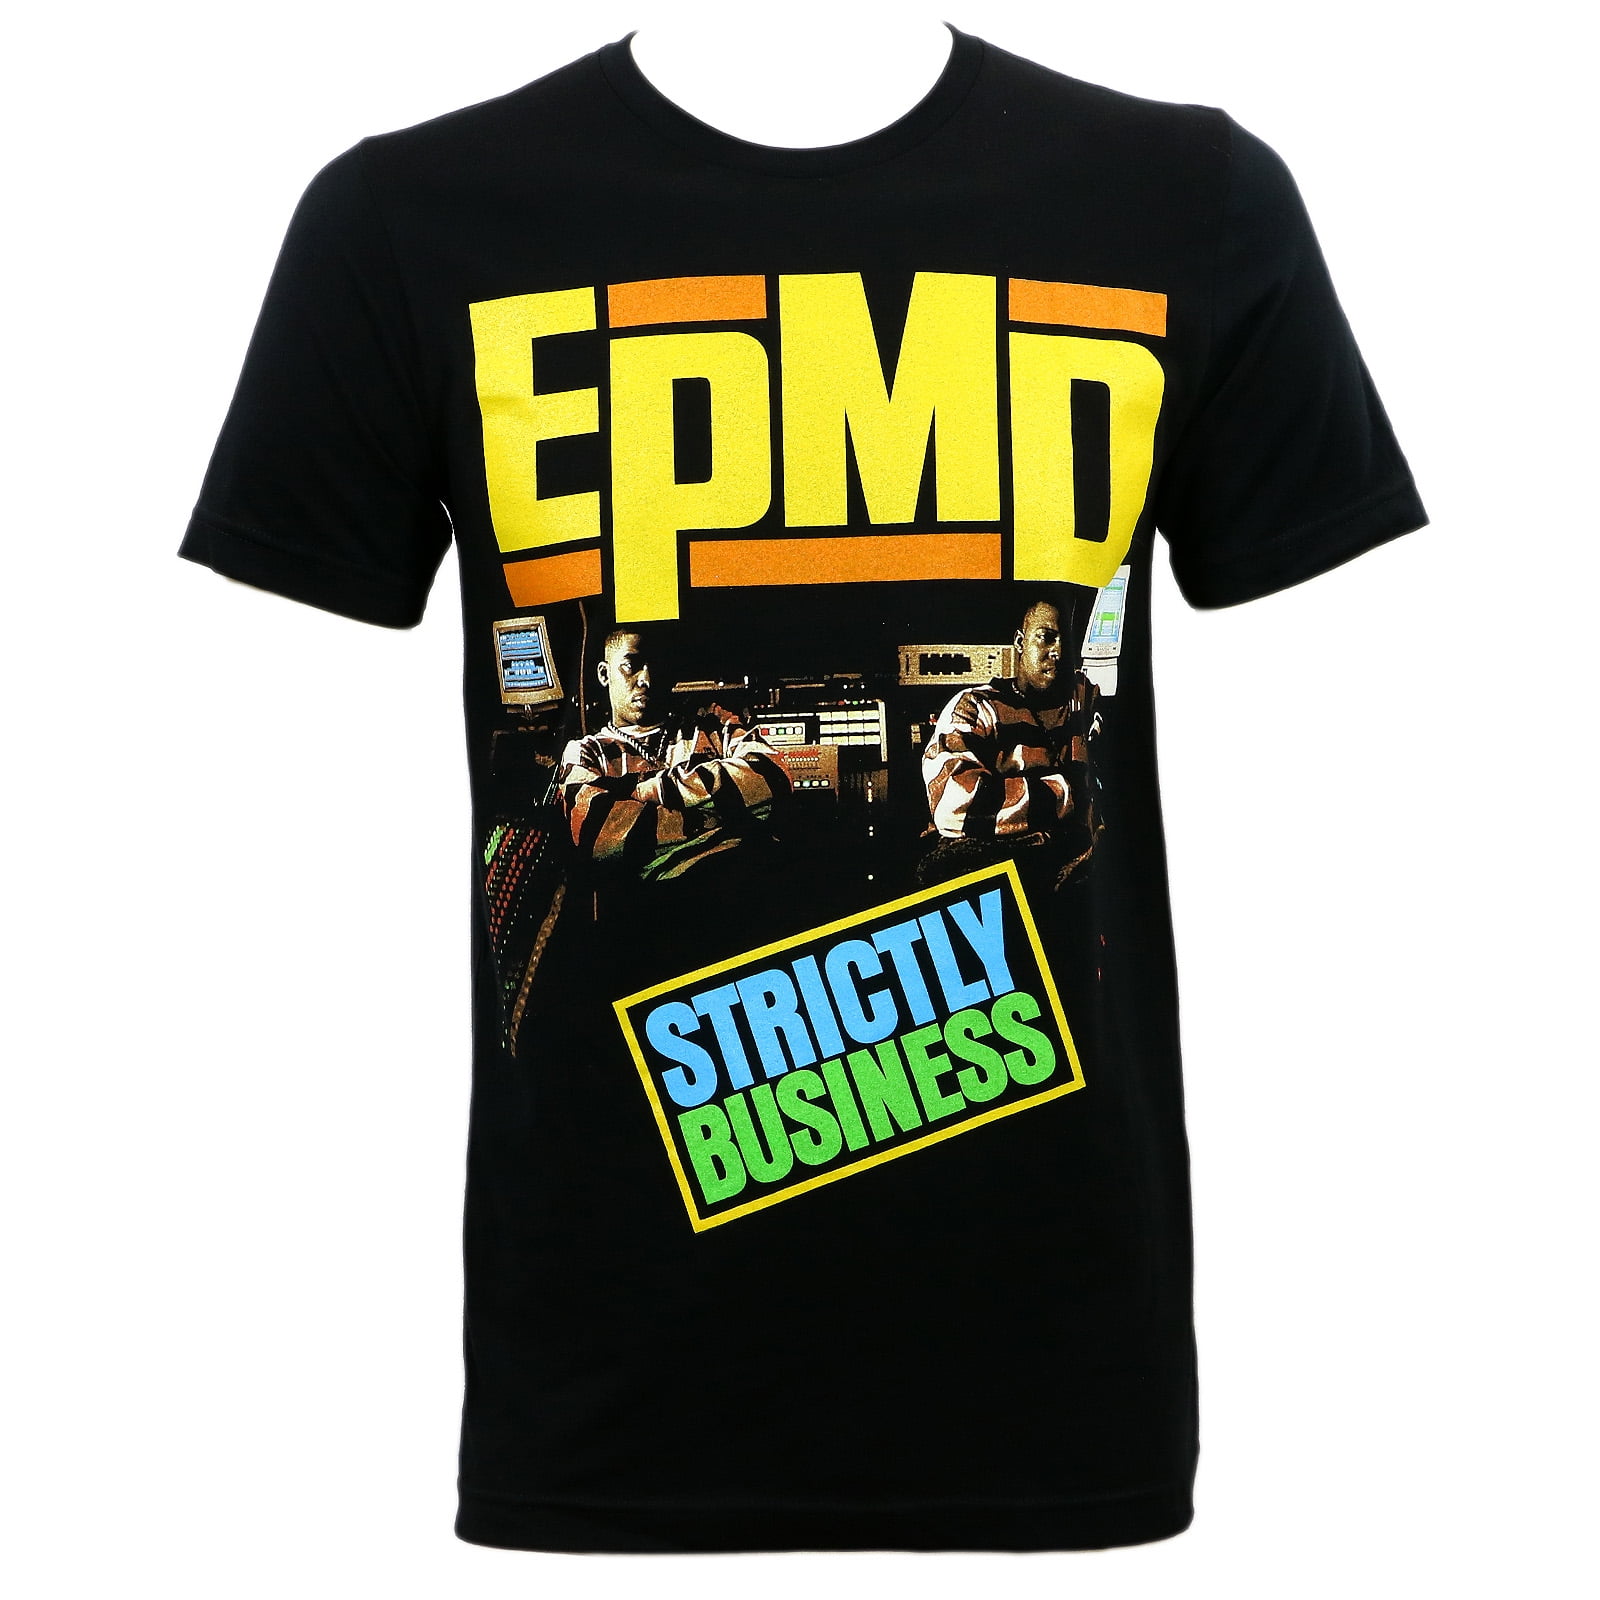 Slim　Industry　Fit　Control　T-Shirt　Men's　Licensed　Merchandise　EPMD　Business　Strictly　Large